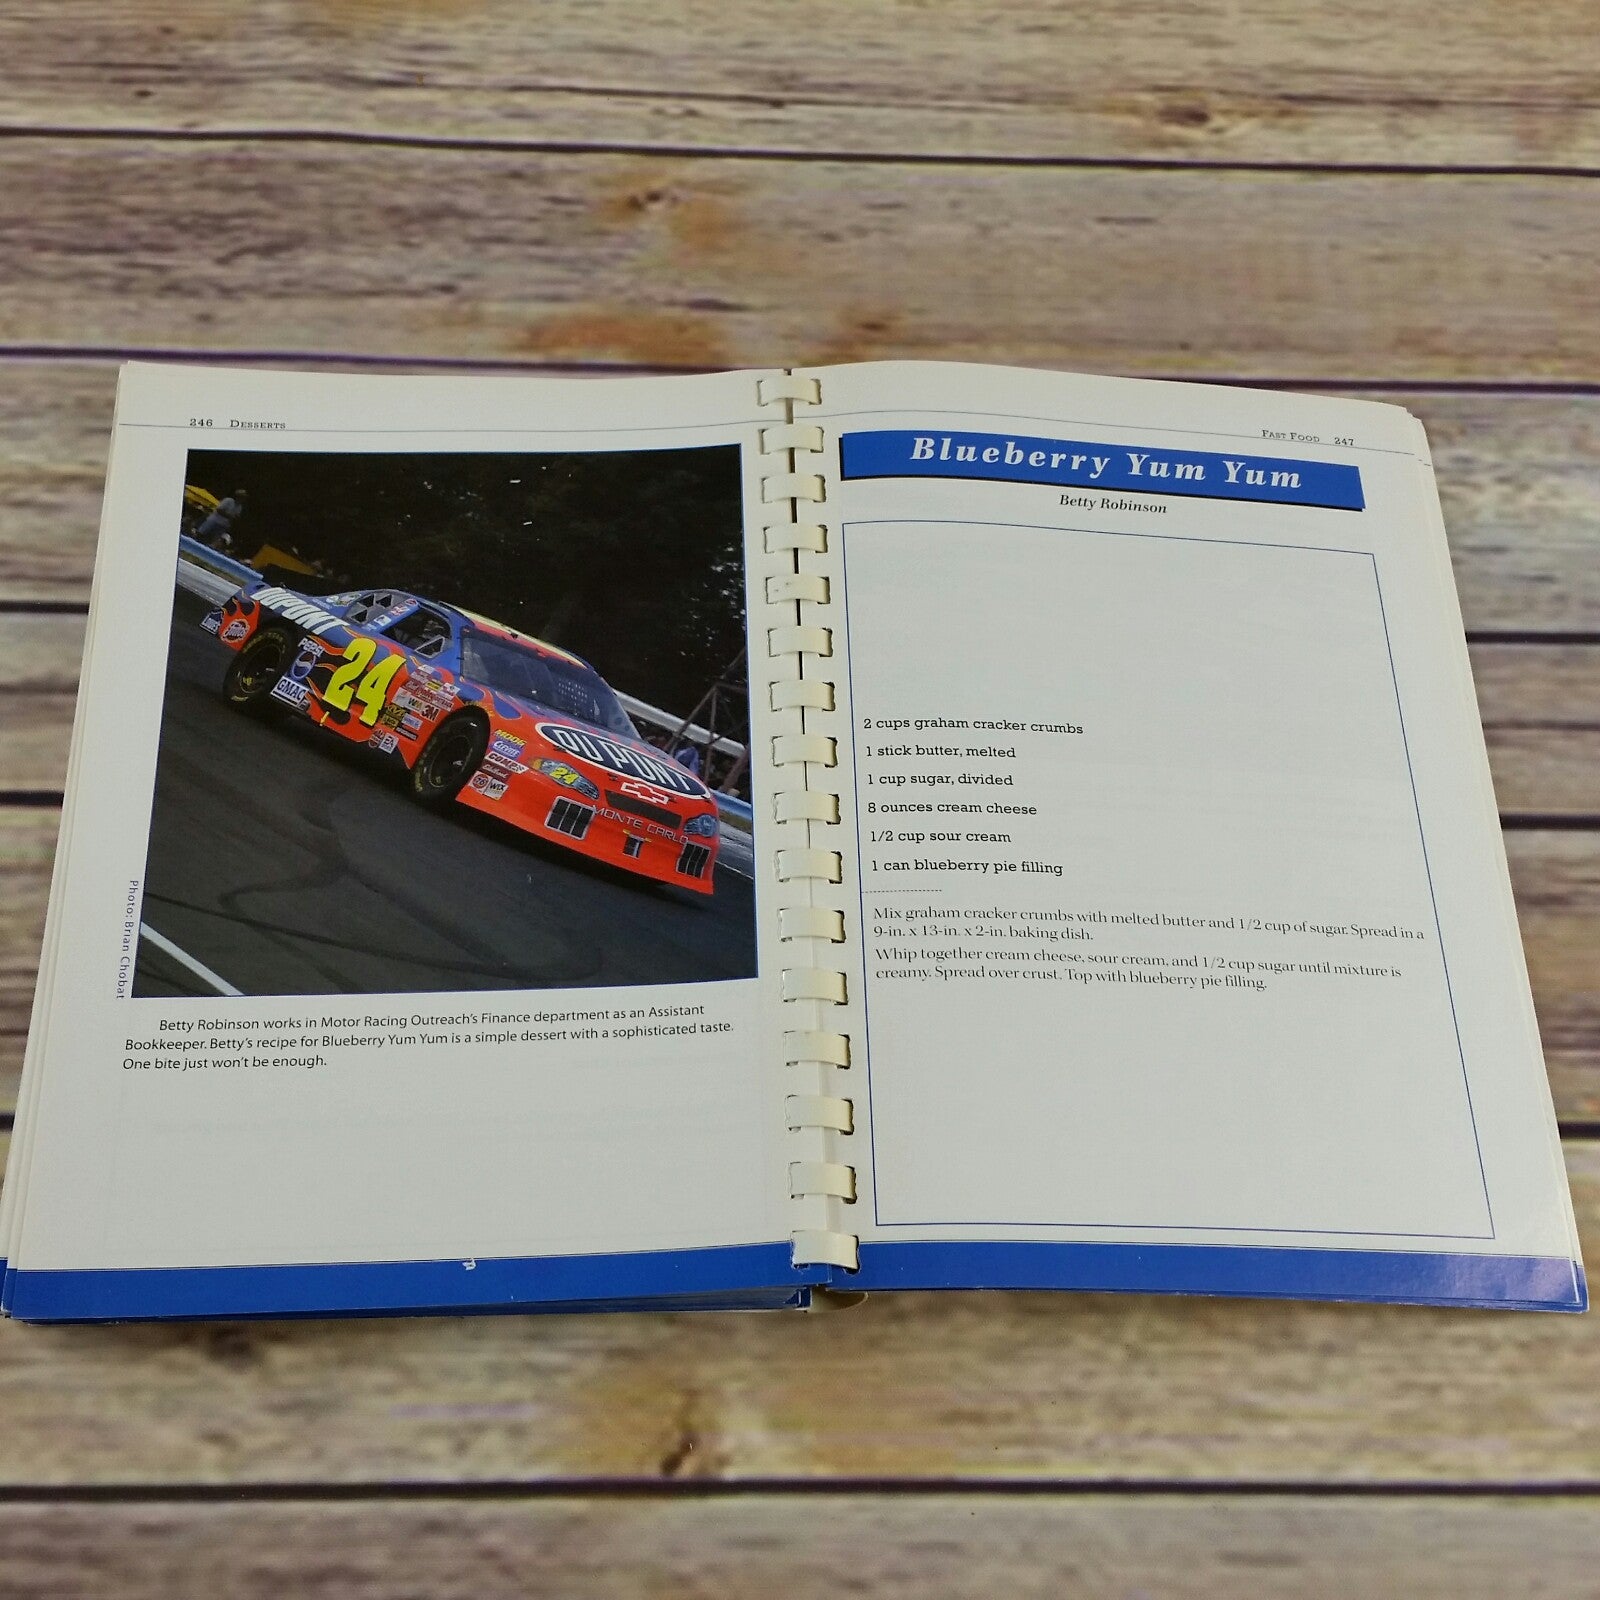 Vintage Nascar Cookbook Recipes from Favorite Drivers Fast Food Hendrick Marrow Program Spiral Bound 150 Recipes - At Grandma's Table